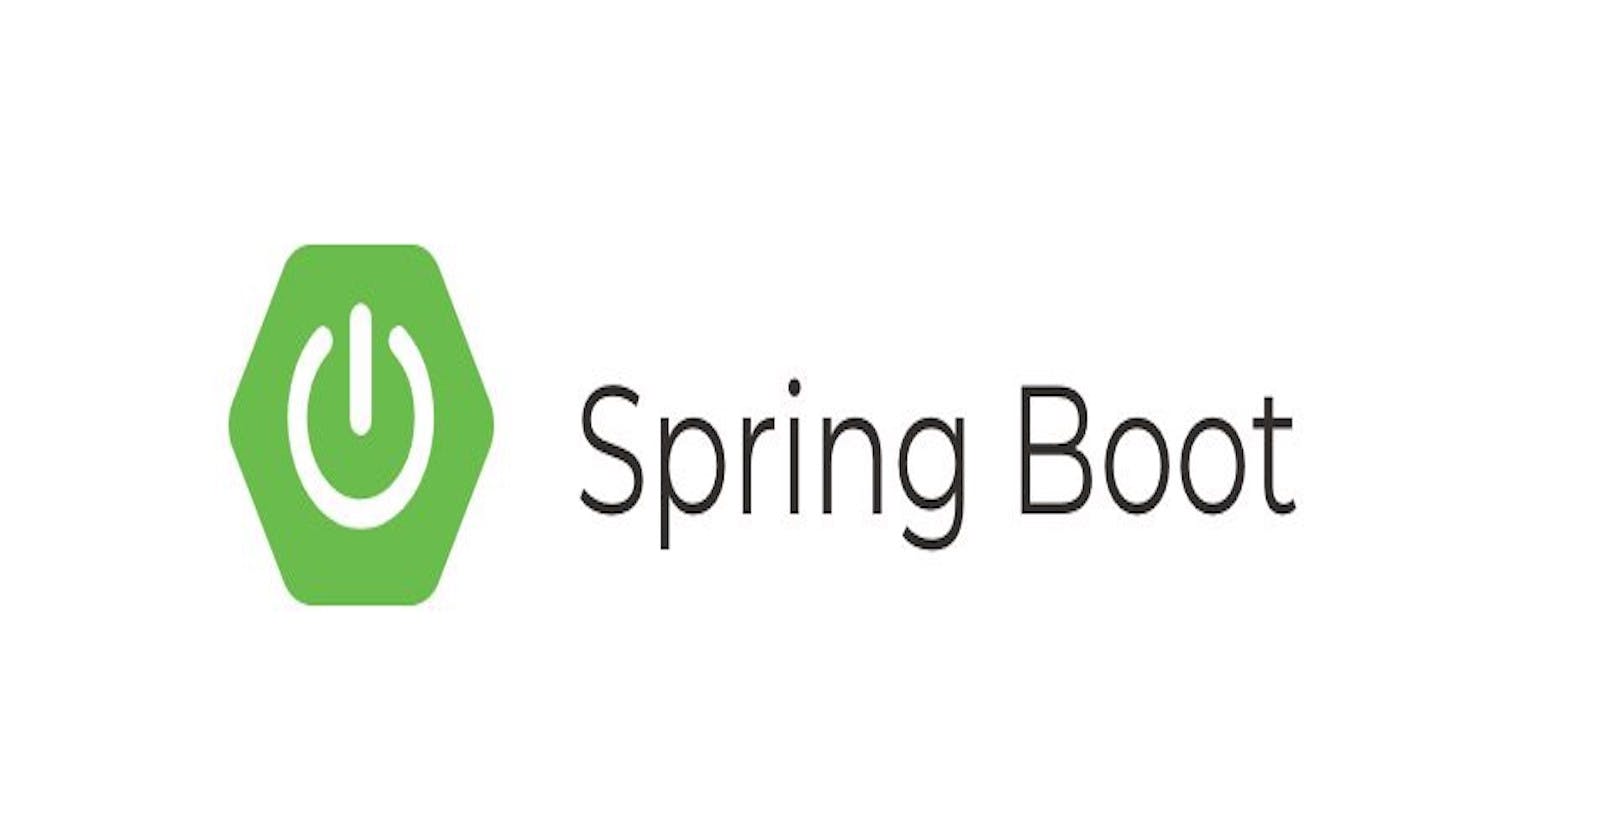 Tutorial: Creating a SpringBoot Application from beginning.